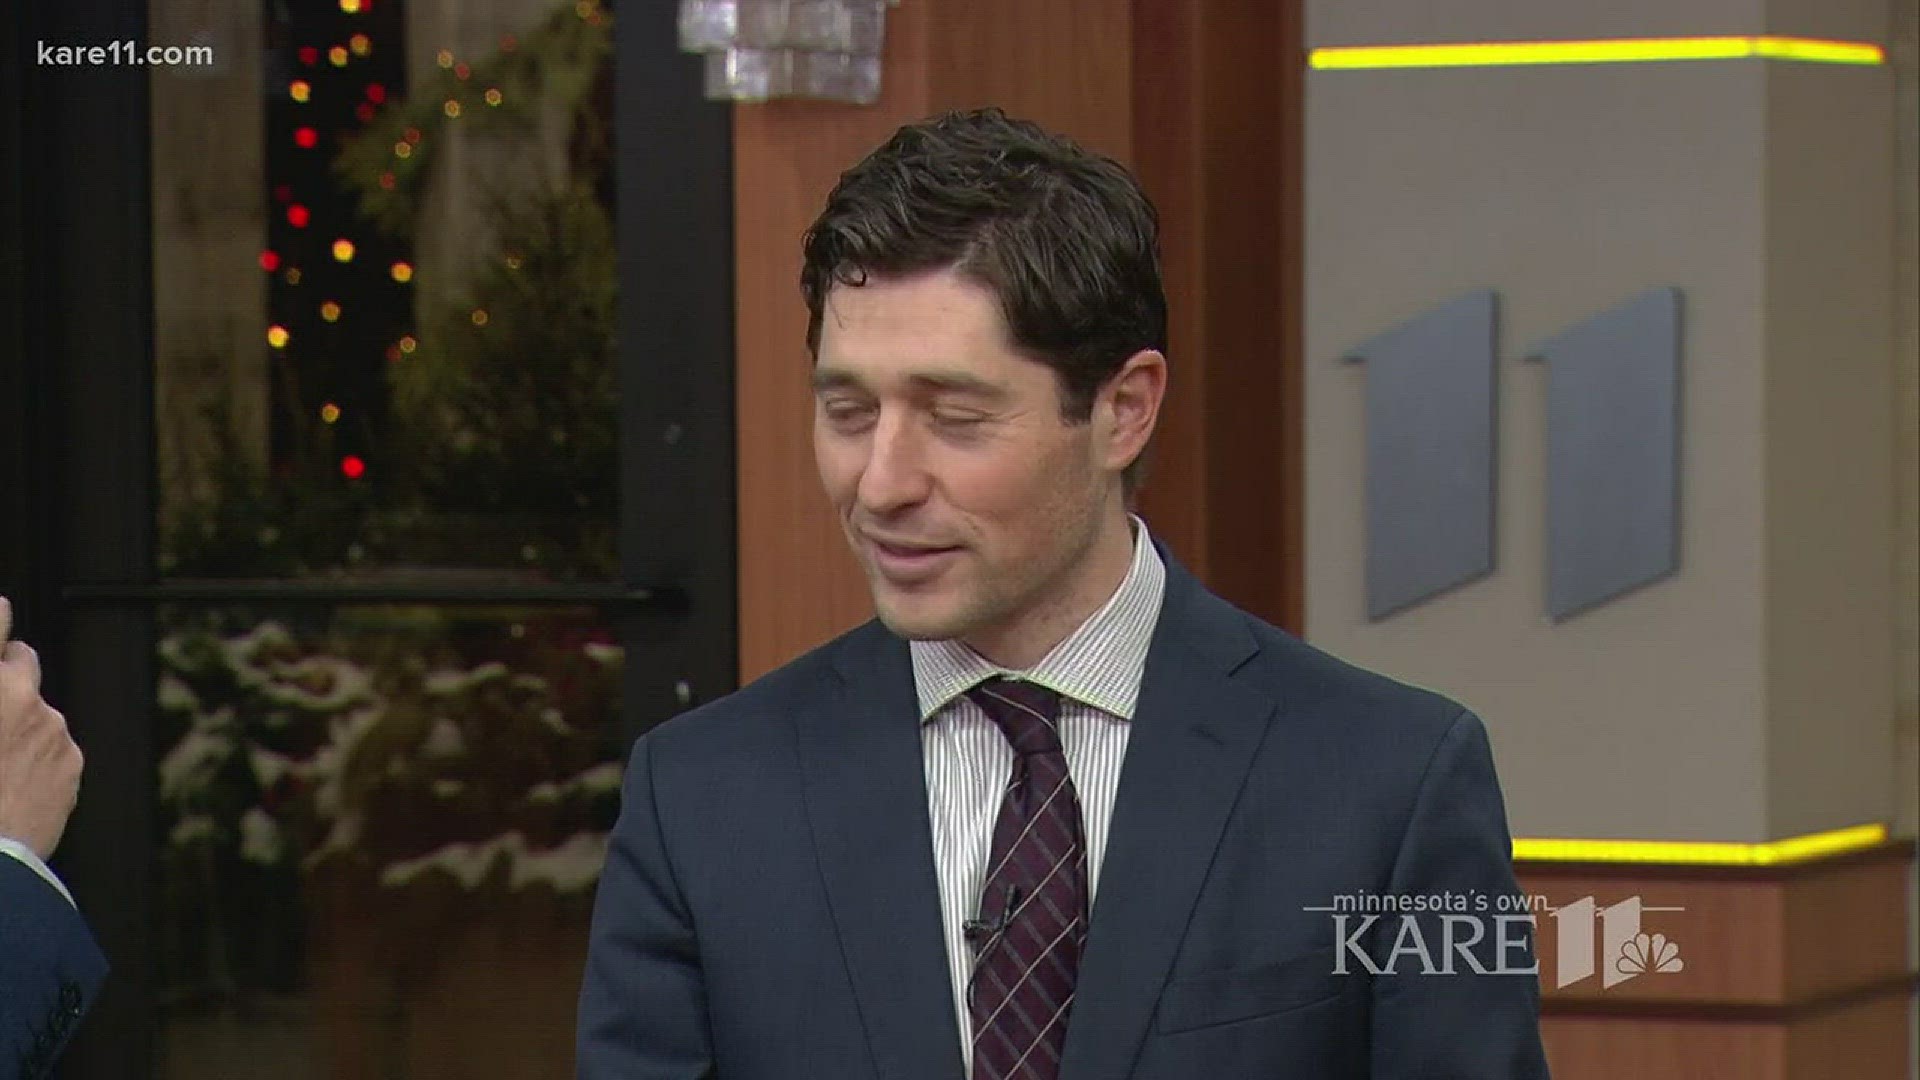 As part of his visit to KARE 11 Sunrise, new Minneapolis Mayor Jacob Frey took questions from viewers about his plans to improve life in the city.